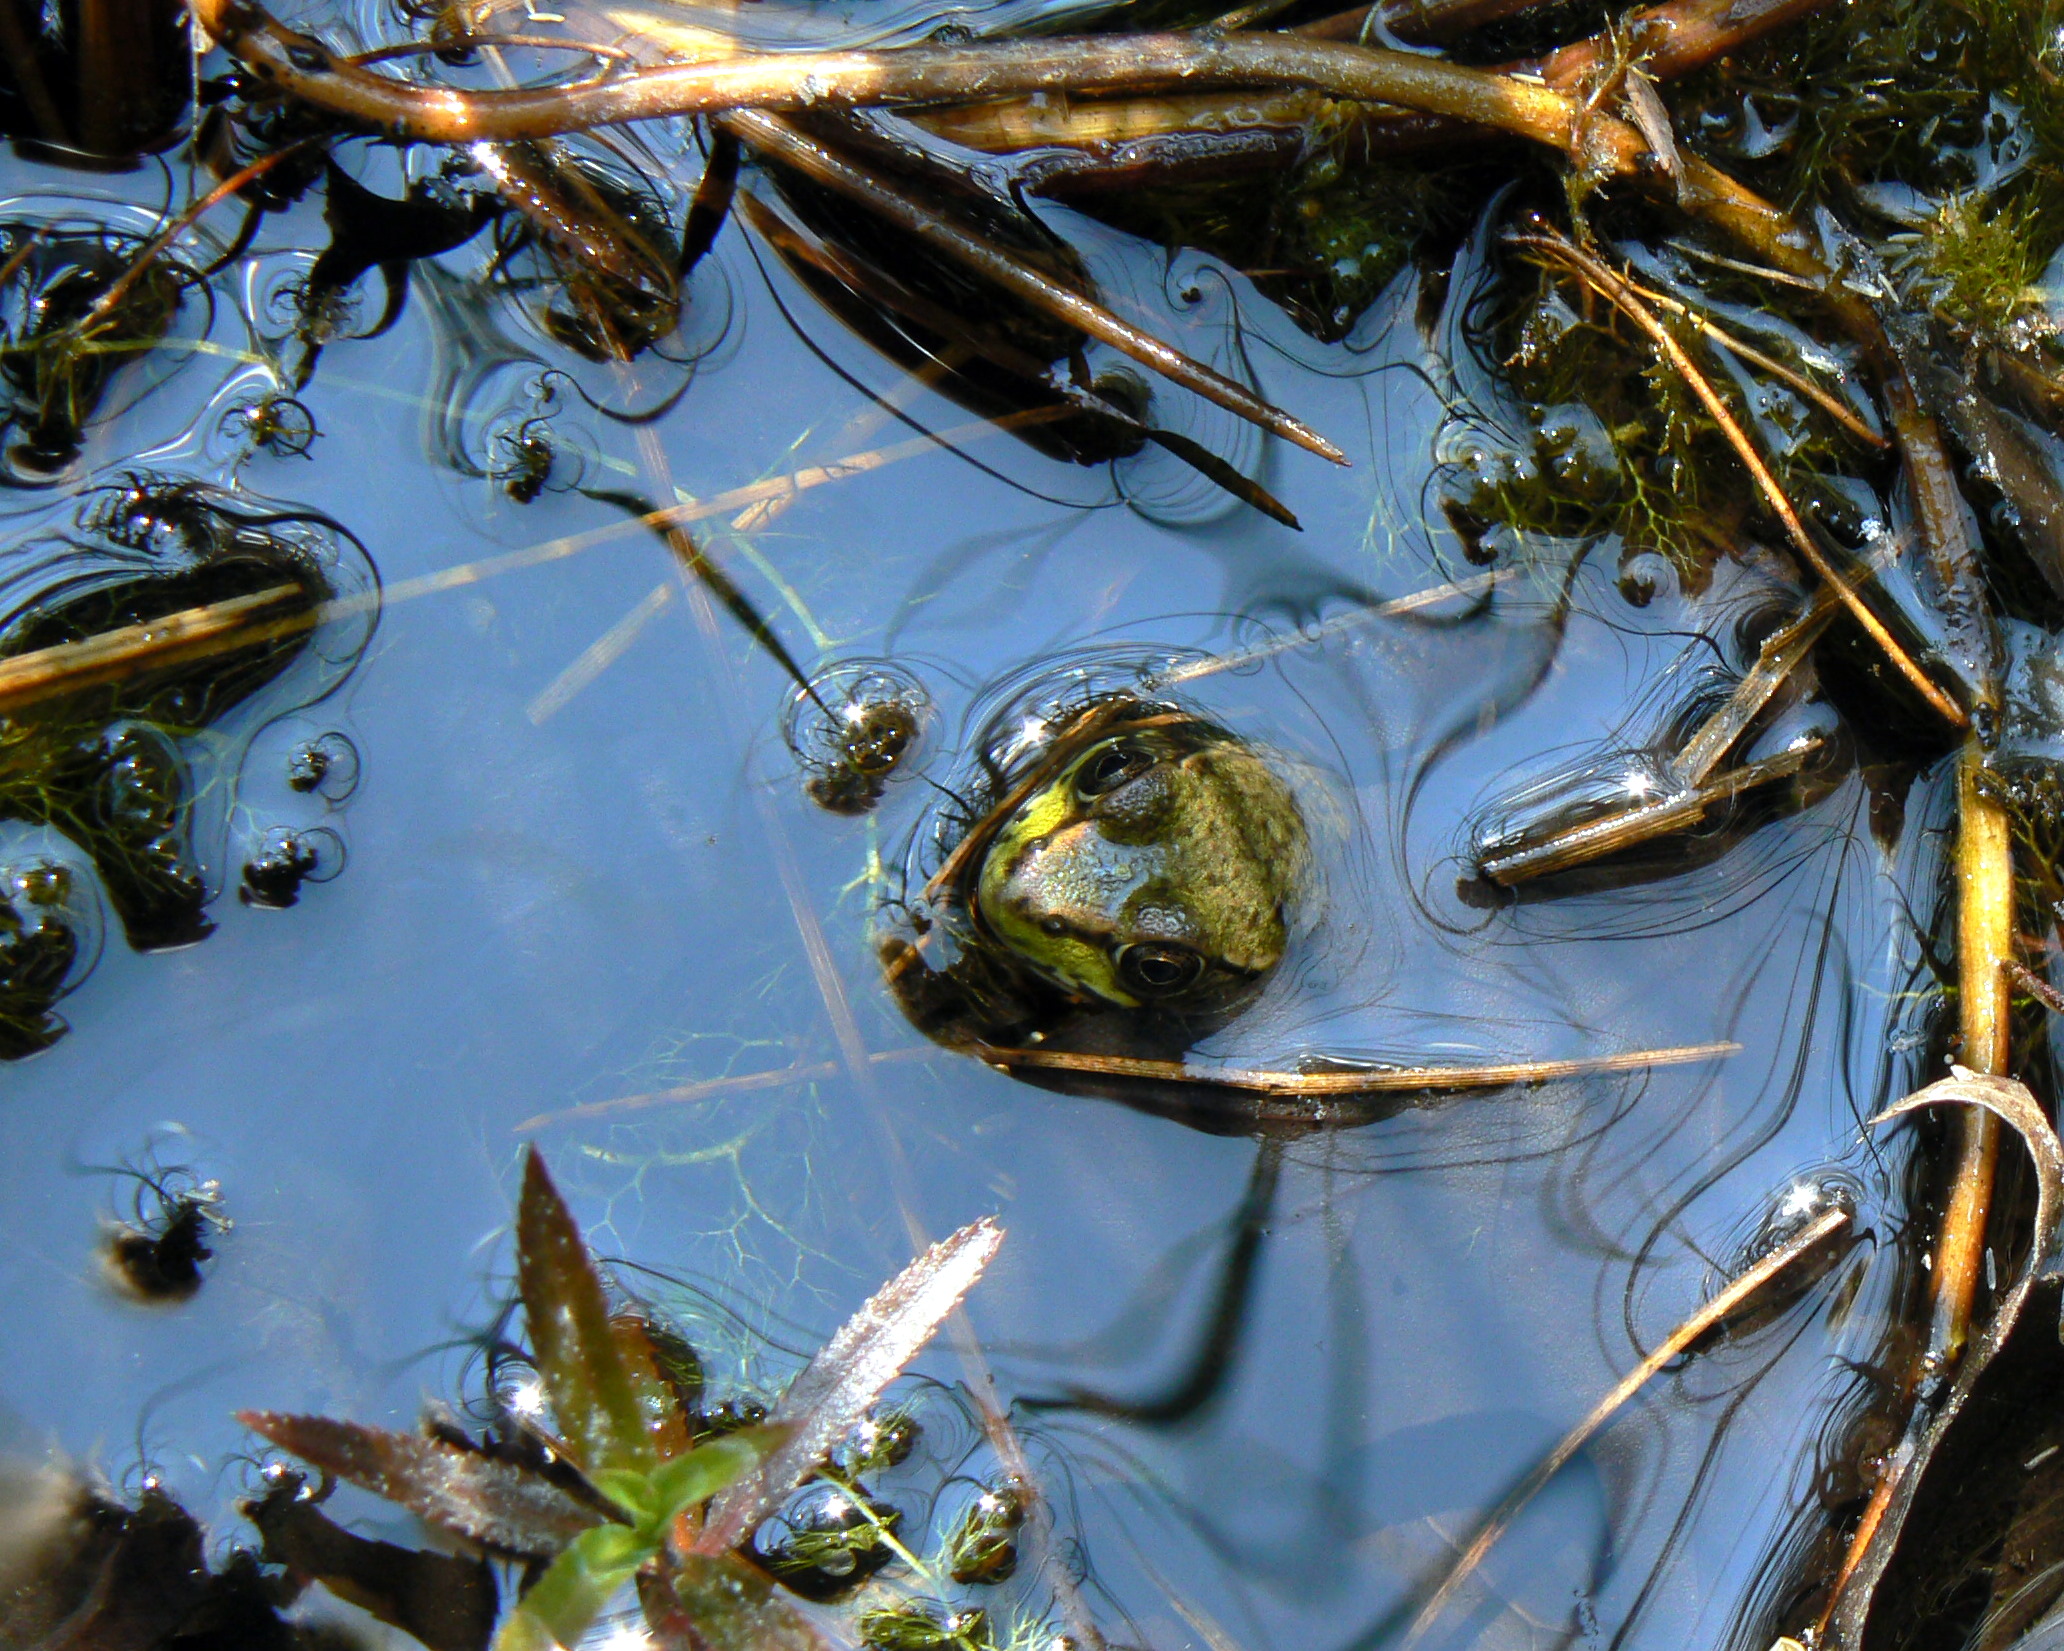 a group of small fish swimming around a water covered with algae